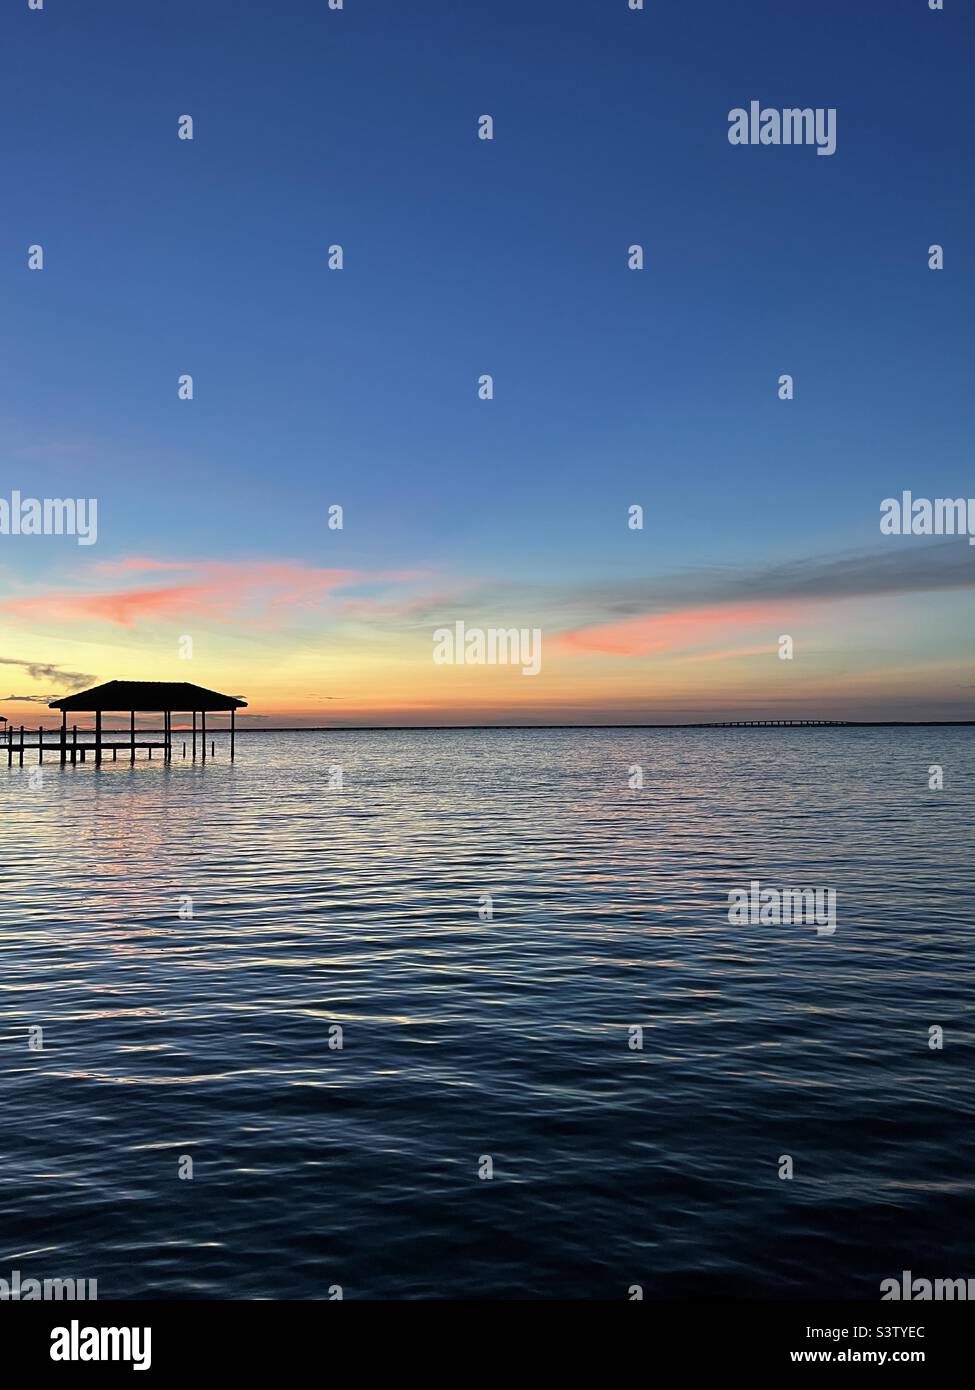 Colorful blue hour sunset with pier over bay water Stock Photo